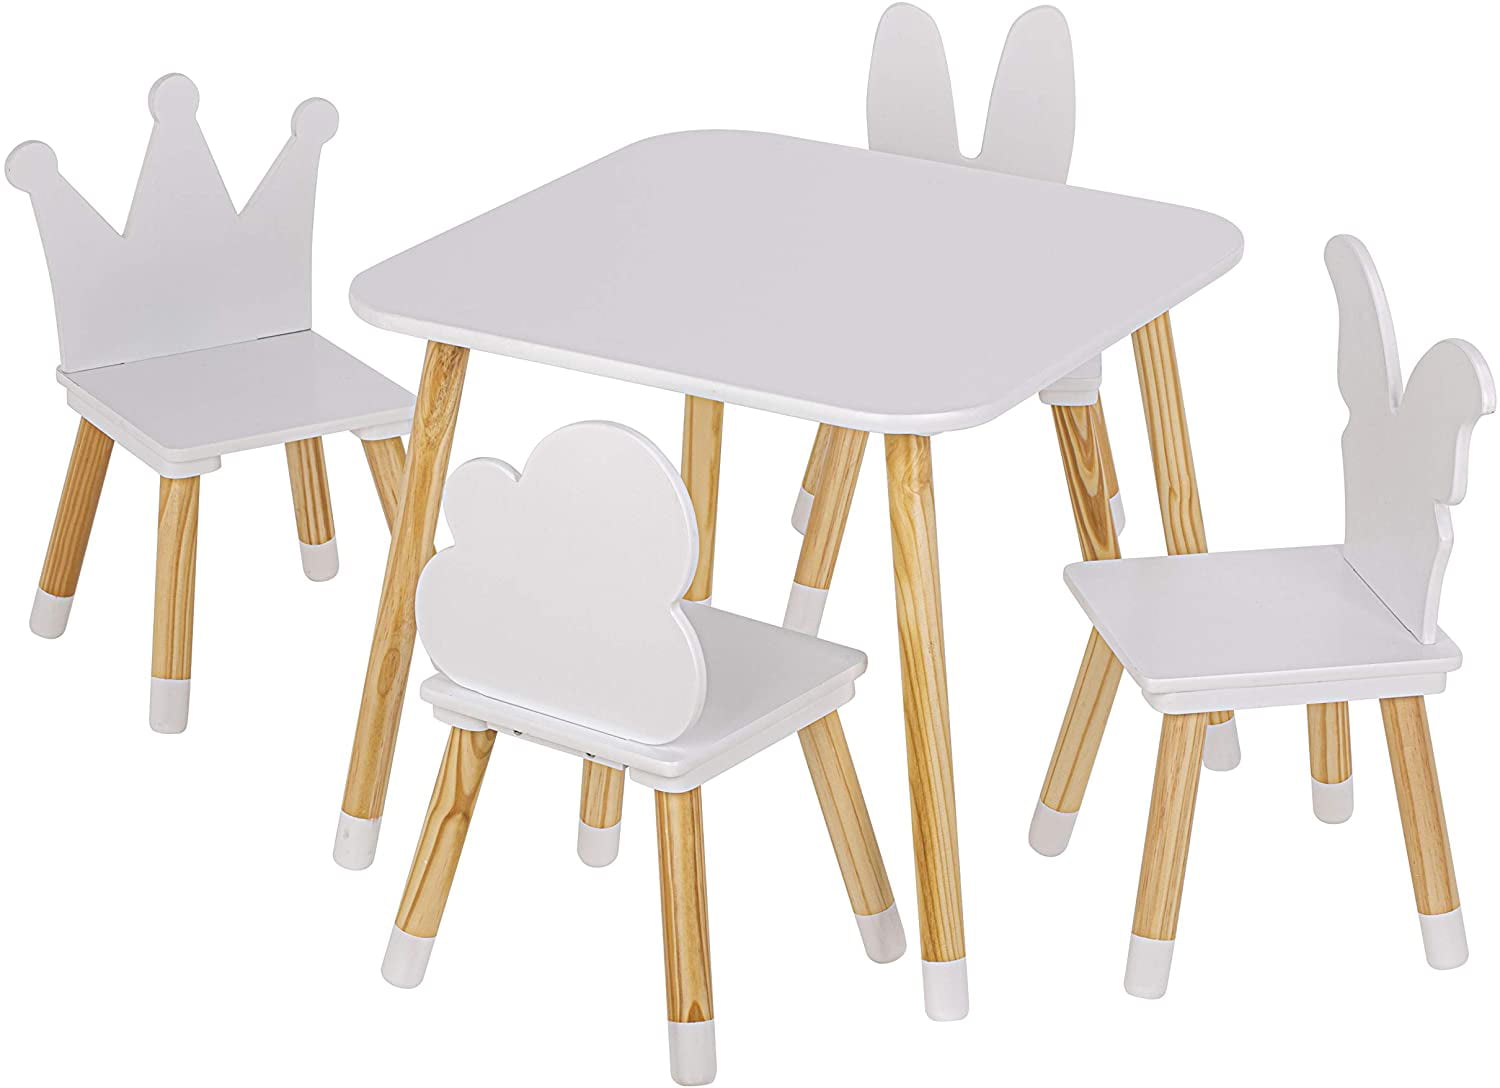 childrens table and chairs black friday